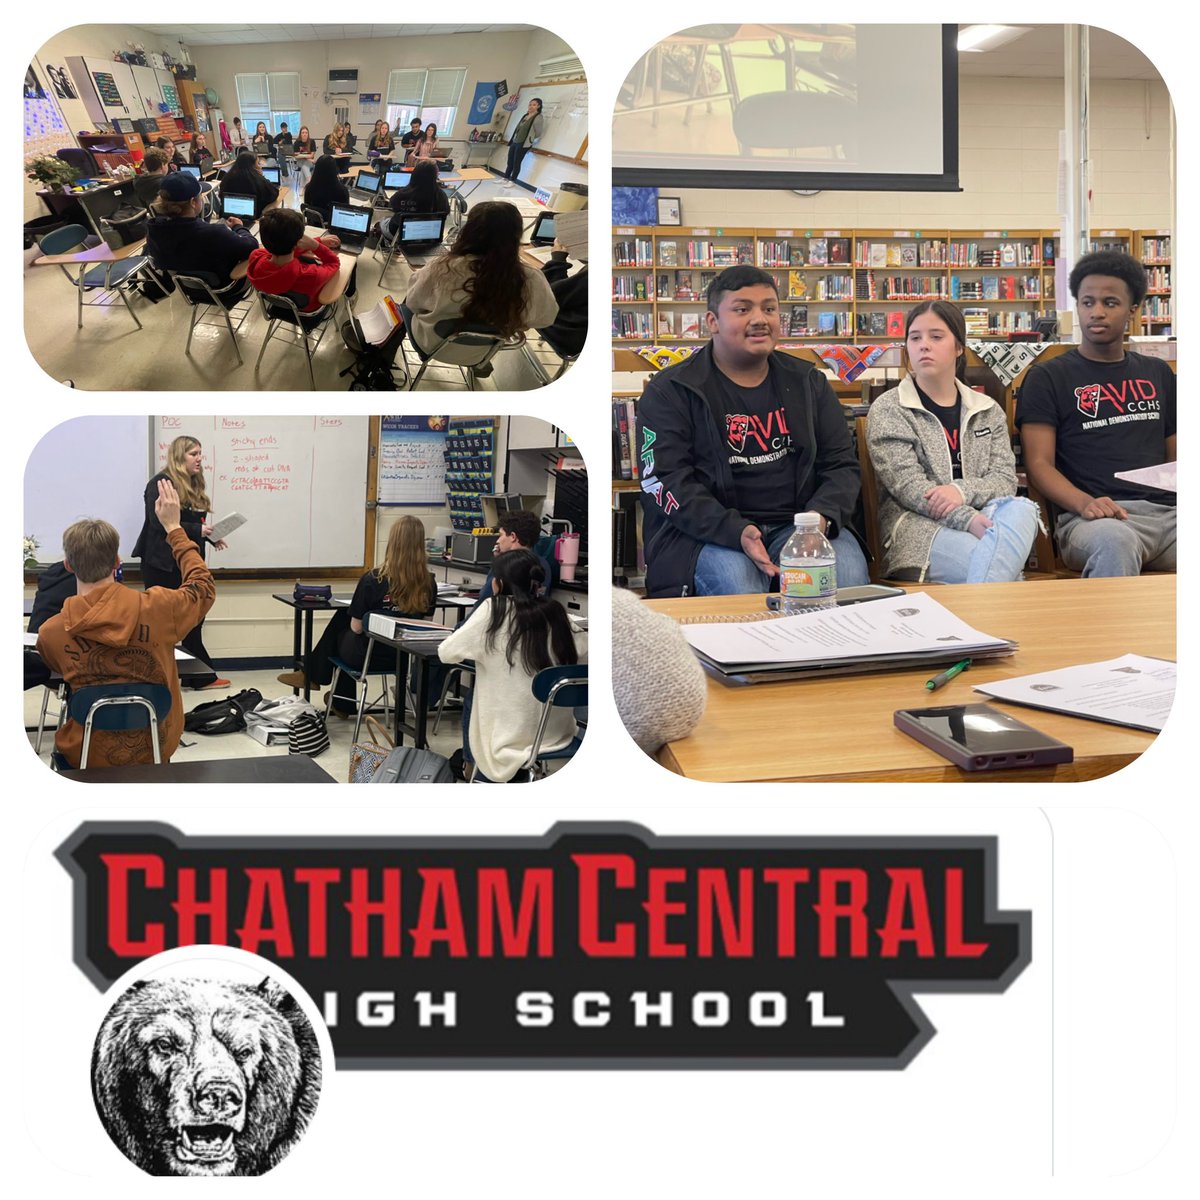 Thanks to @ChathamCentral for hosting our district visit! Great things happening at this AVID National Demonstration School! @AVID4College